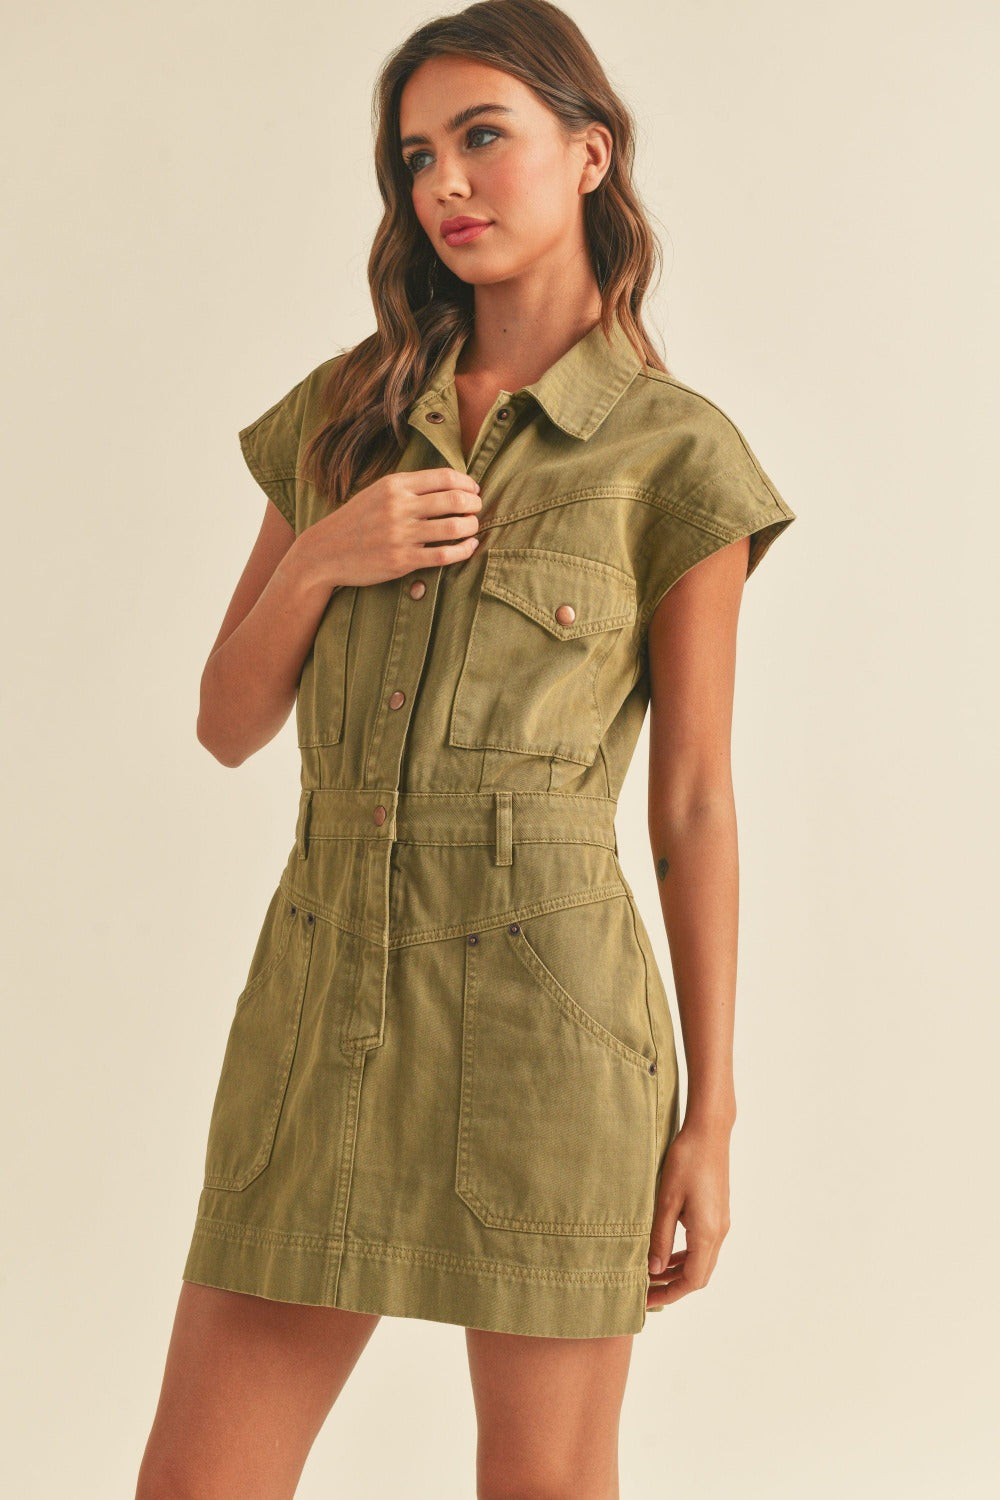 Olive green cargo dress mini dress with copper snap buttons